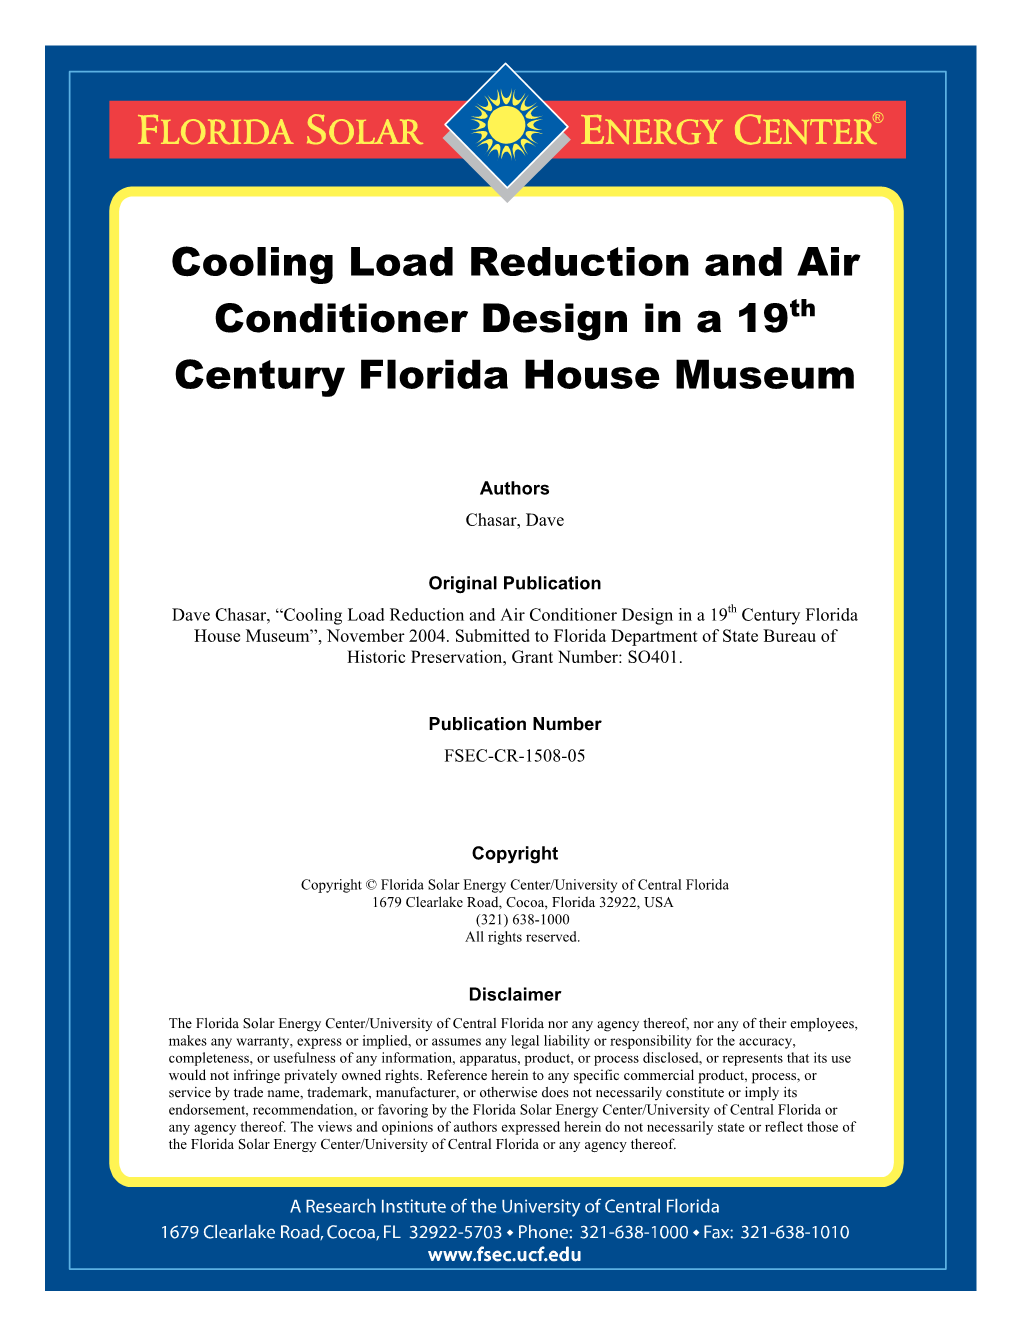 Cooling Load Reduction and Air Conditioner Design in a 19Th Century Florida House Museum